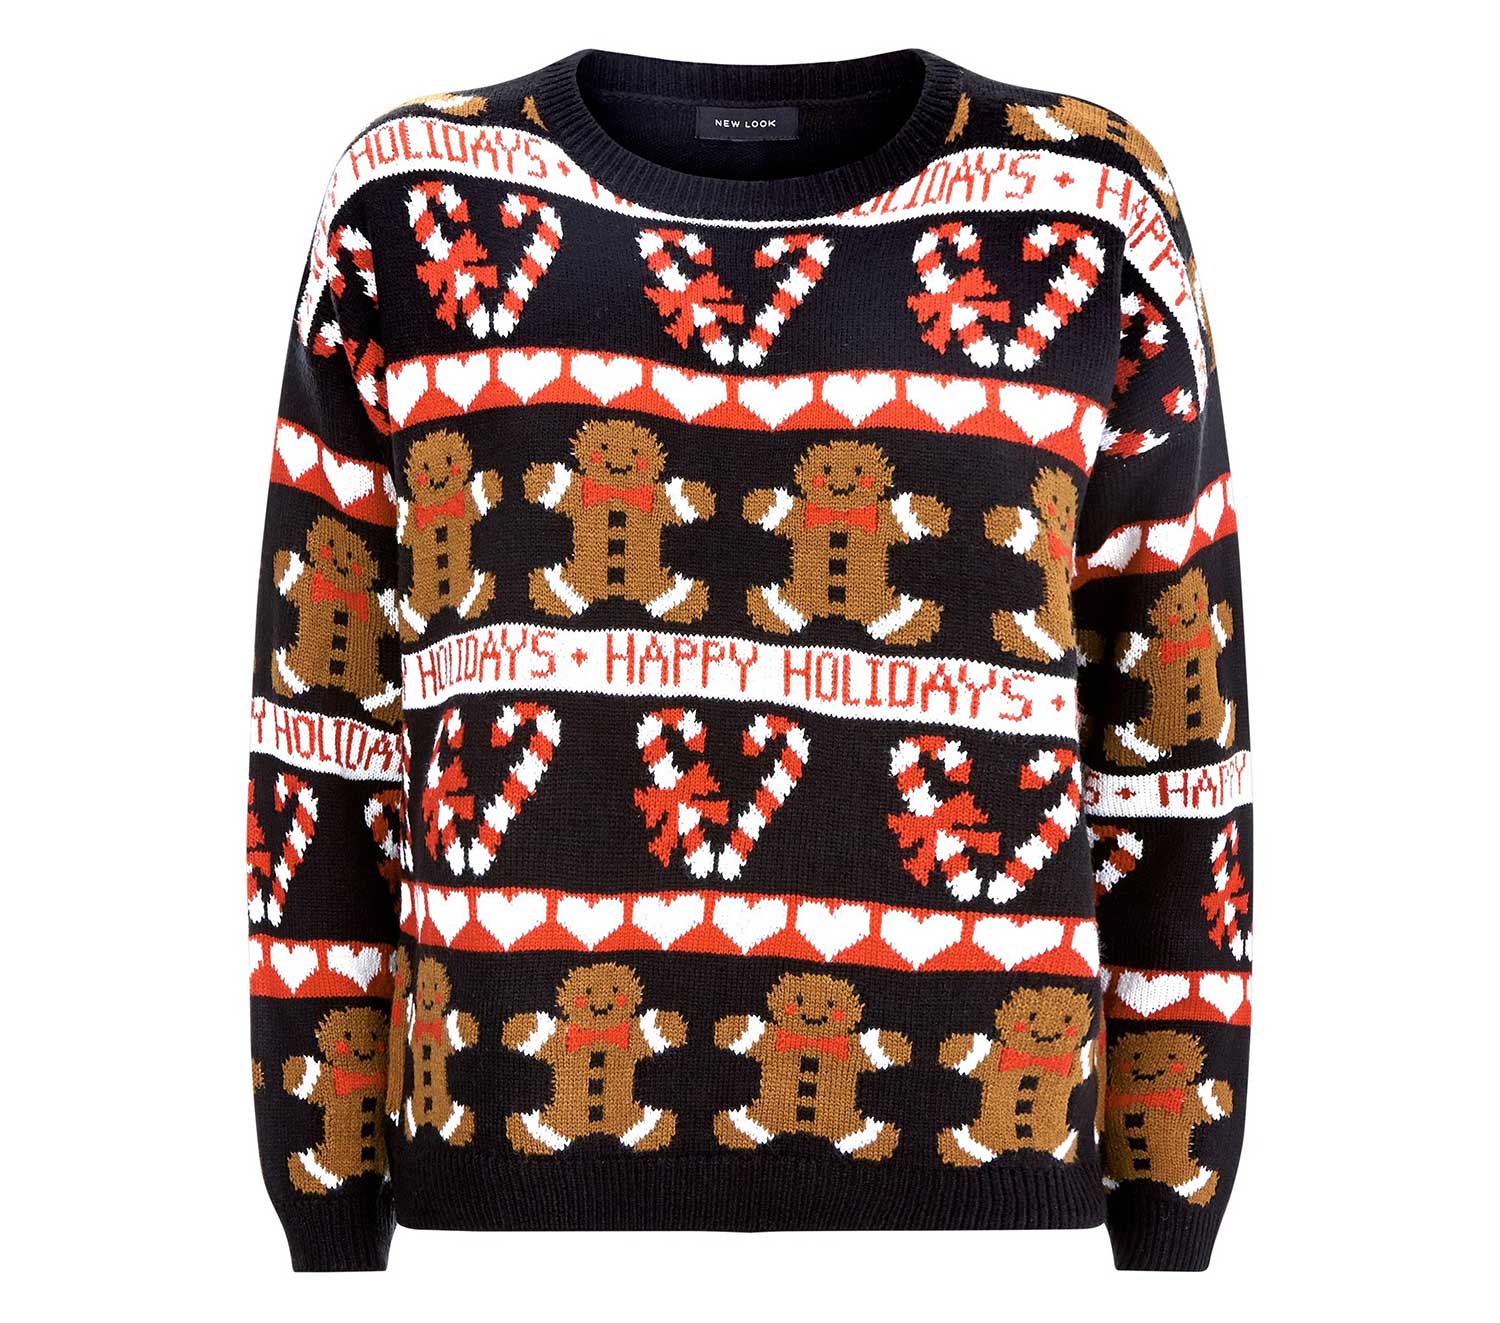 Regular Fit Knitted Christmas Holiday Jumpers in Sizes S HSA Christmas Jumper Novelty Christmas Sweater for Men and Women Unisex Retro Fairisle Santa Party Jumpers Men's & Women's Warm 4XL